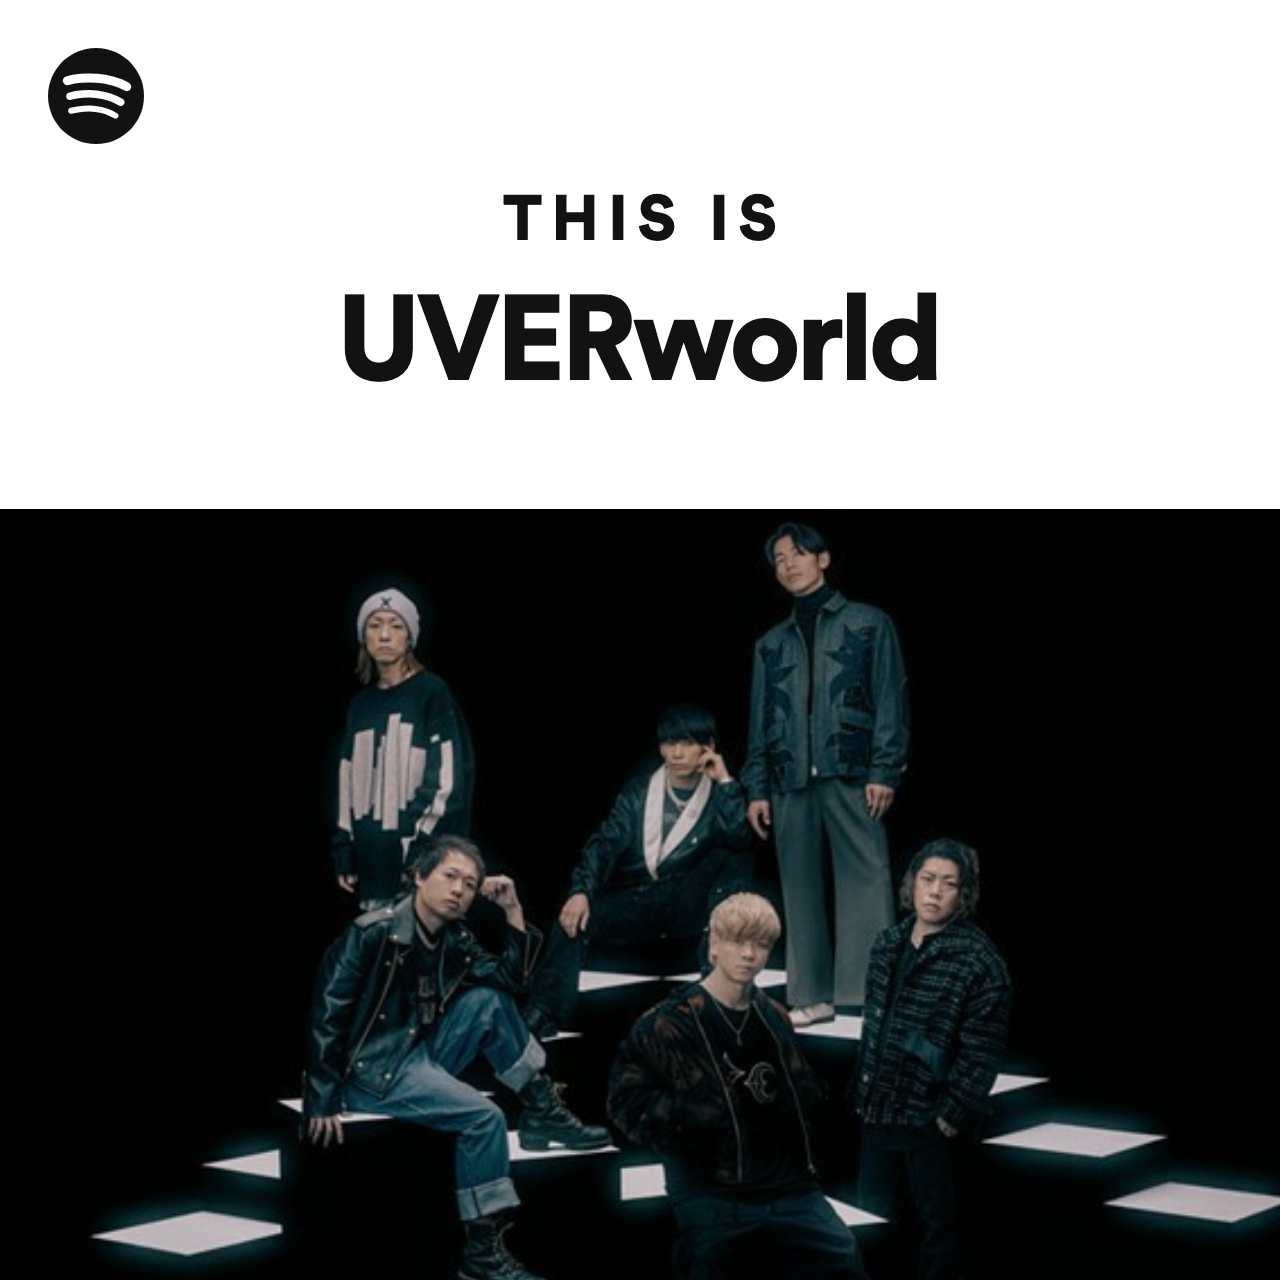 This Is Uverworld Spotify Playlist